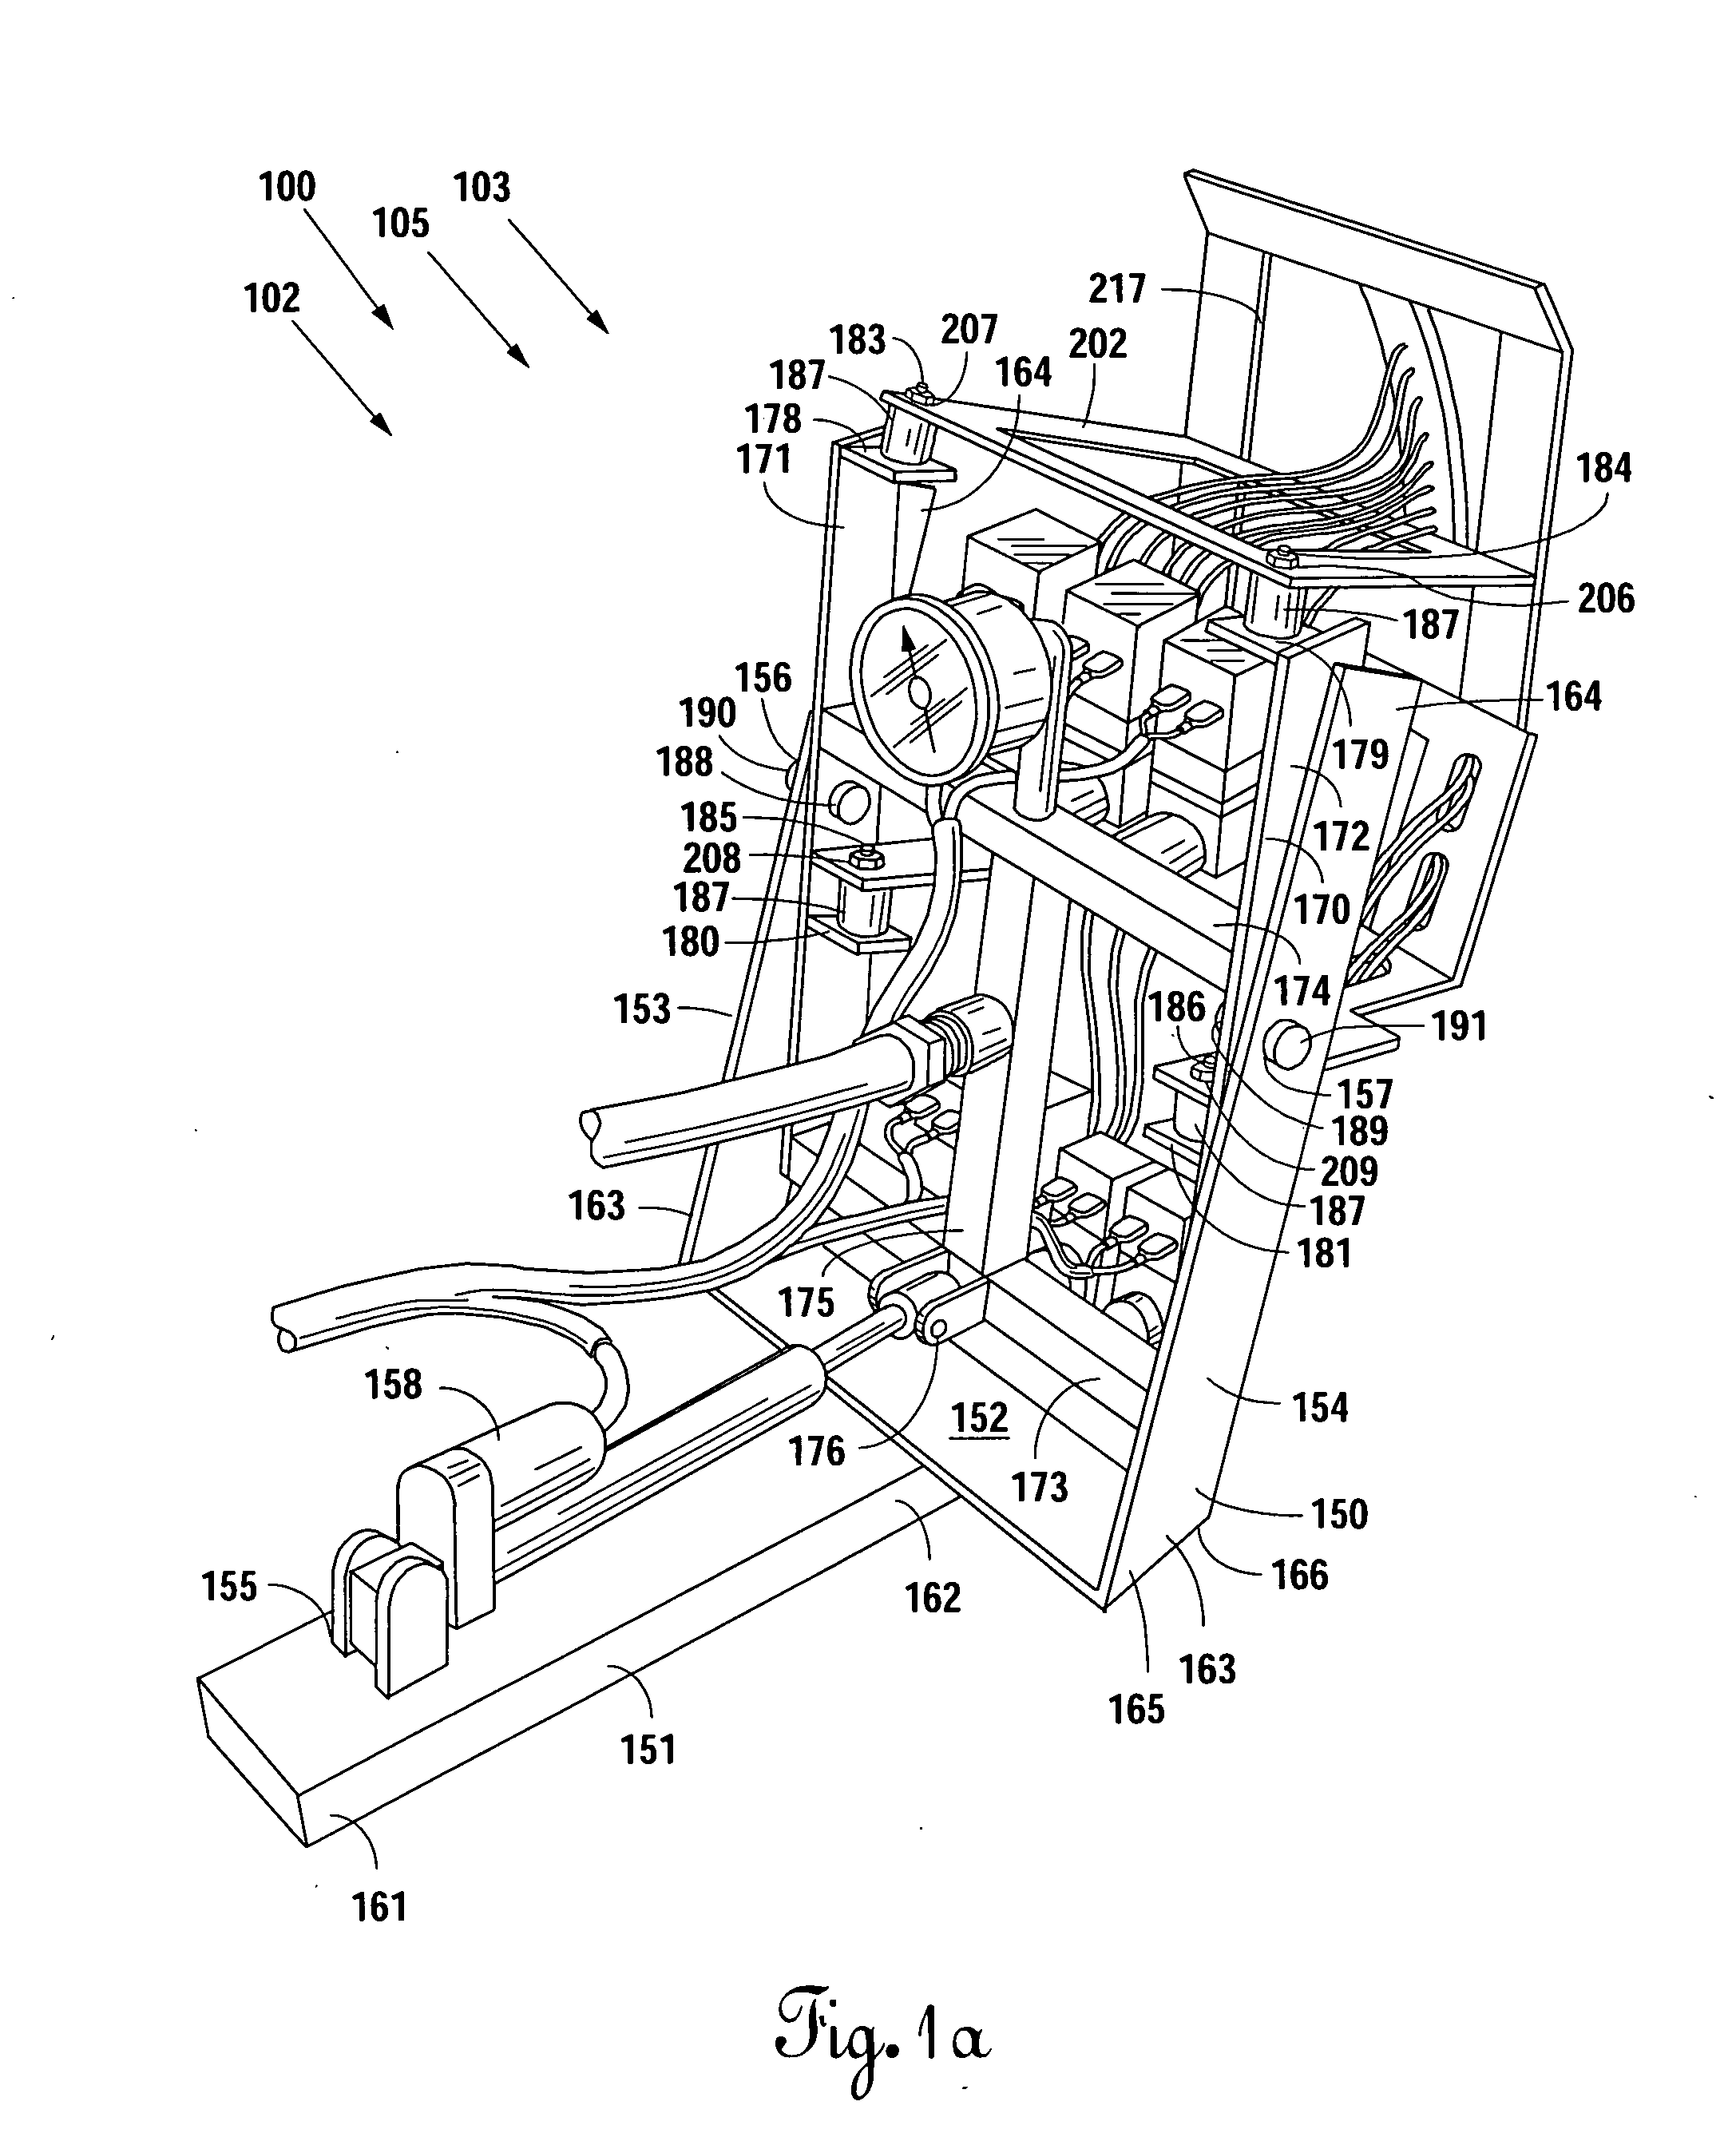 Method and apparatus for a spray system